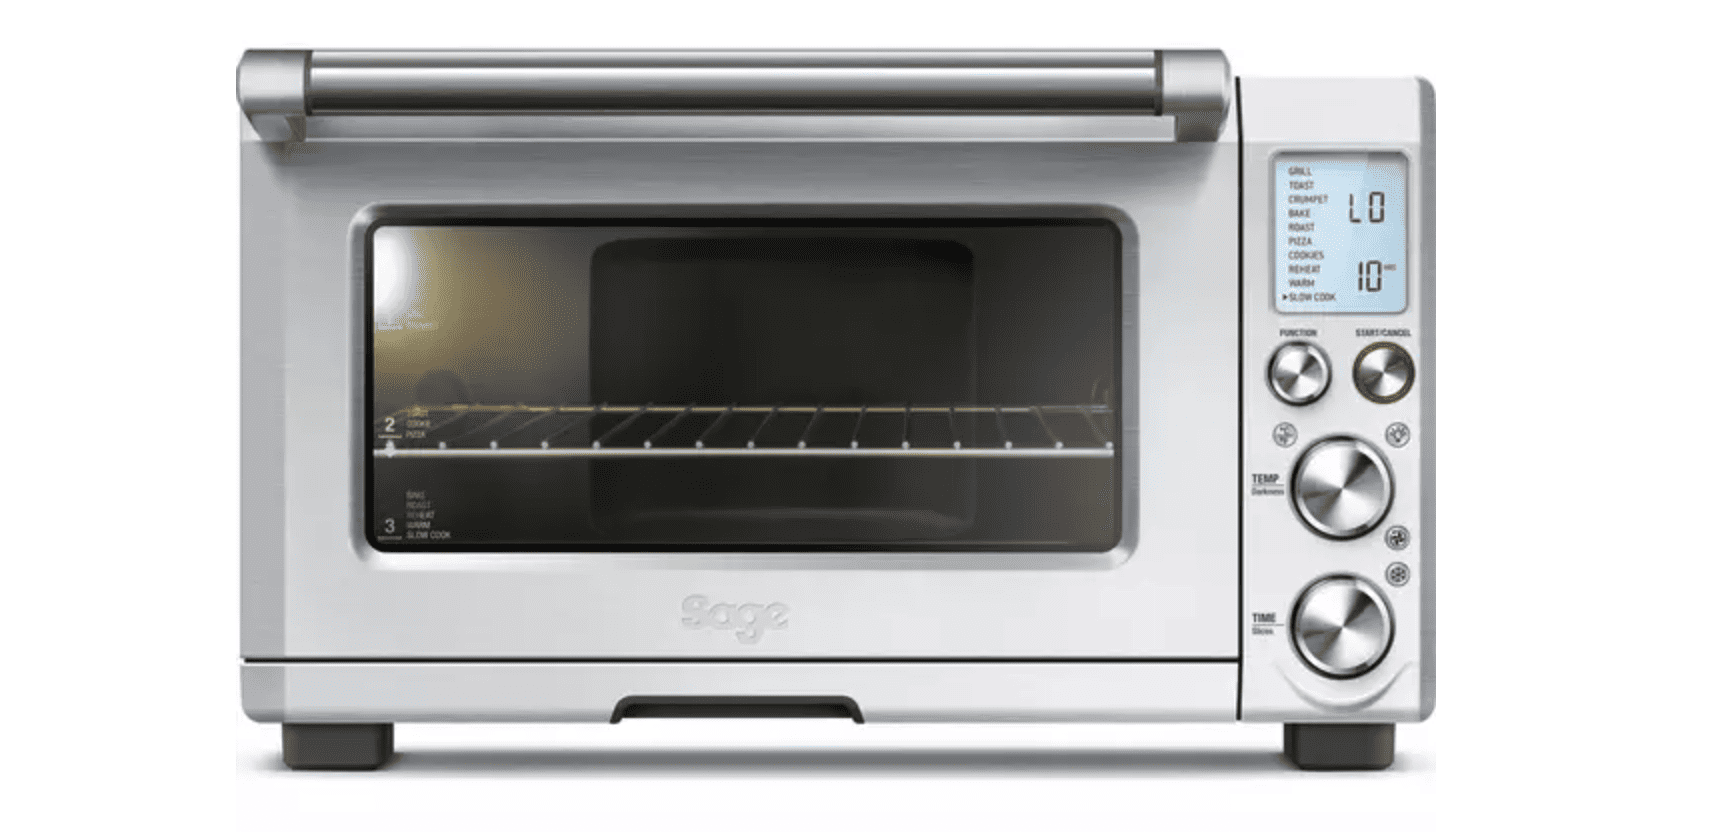 The Sage Smart Oven